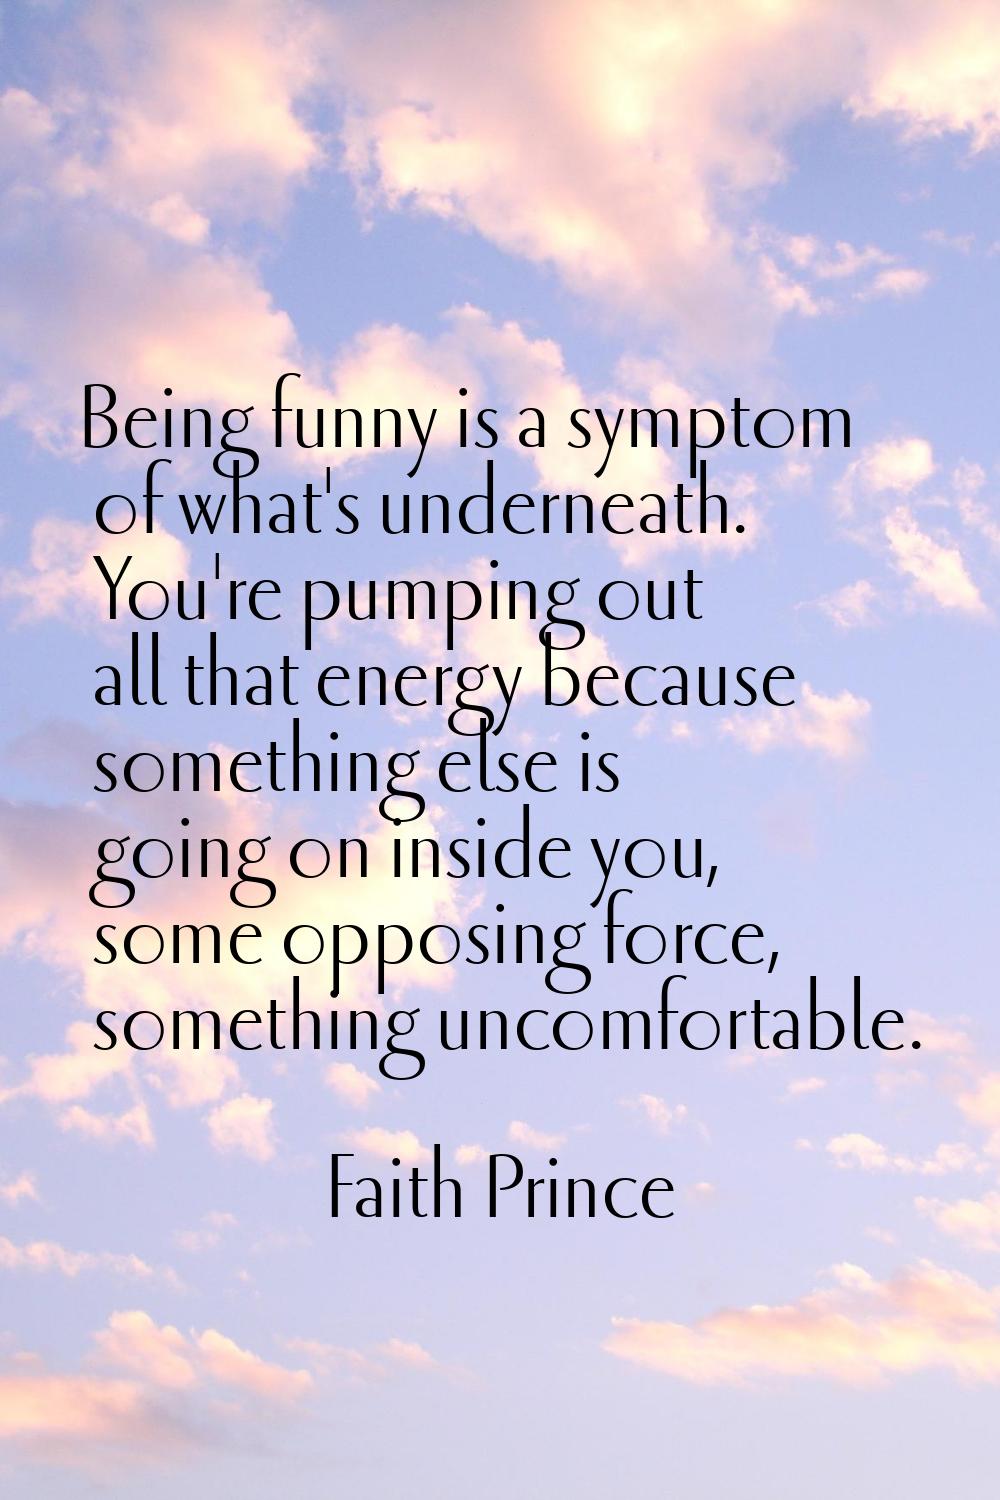 Being funny is a symptom of what's underneath. You're pumping out all that energy because something